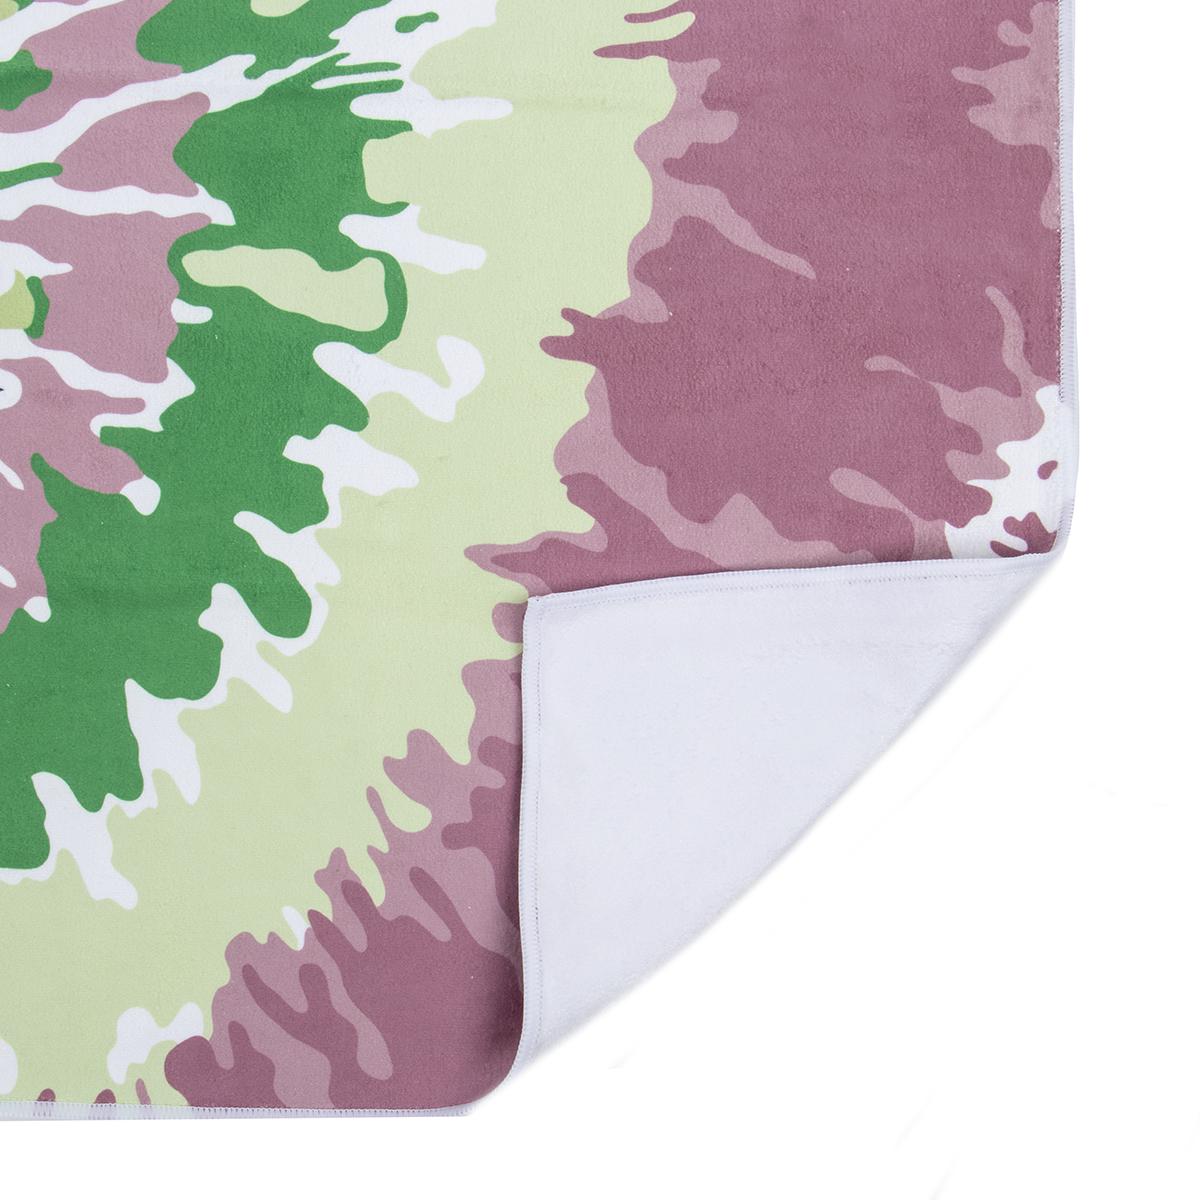 Barstool Transfusion Tie-Dye Golf Towel-Golf Accessories-Fore Play-One Size-Tie Dye-Barstool Sports